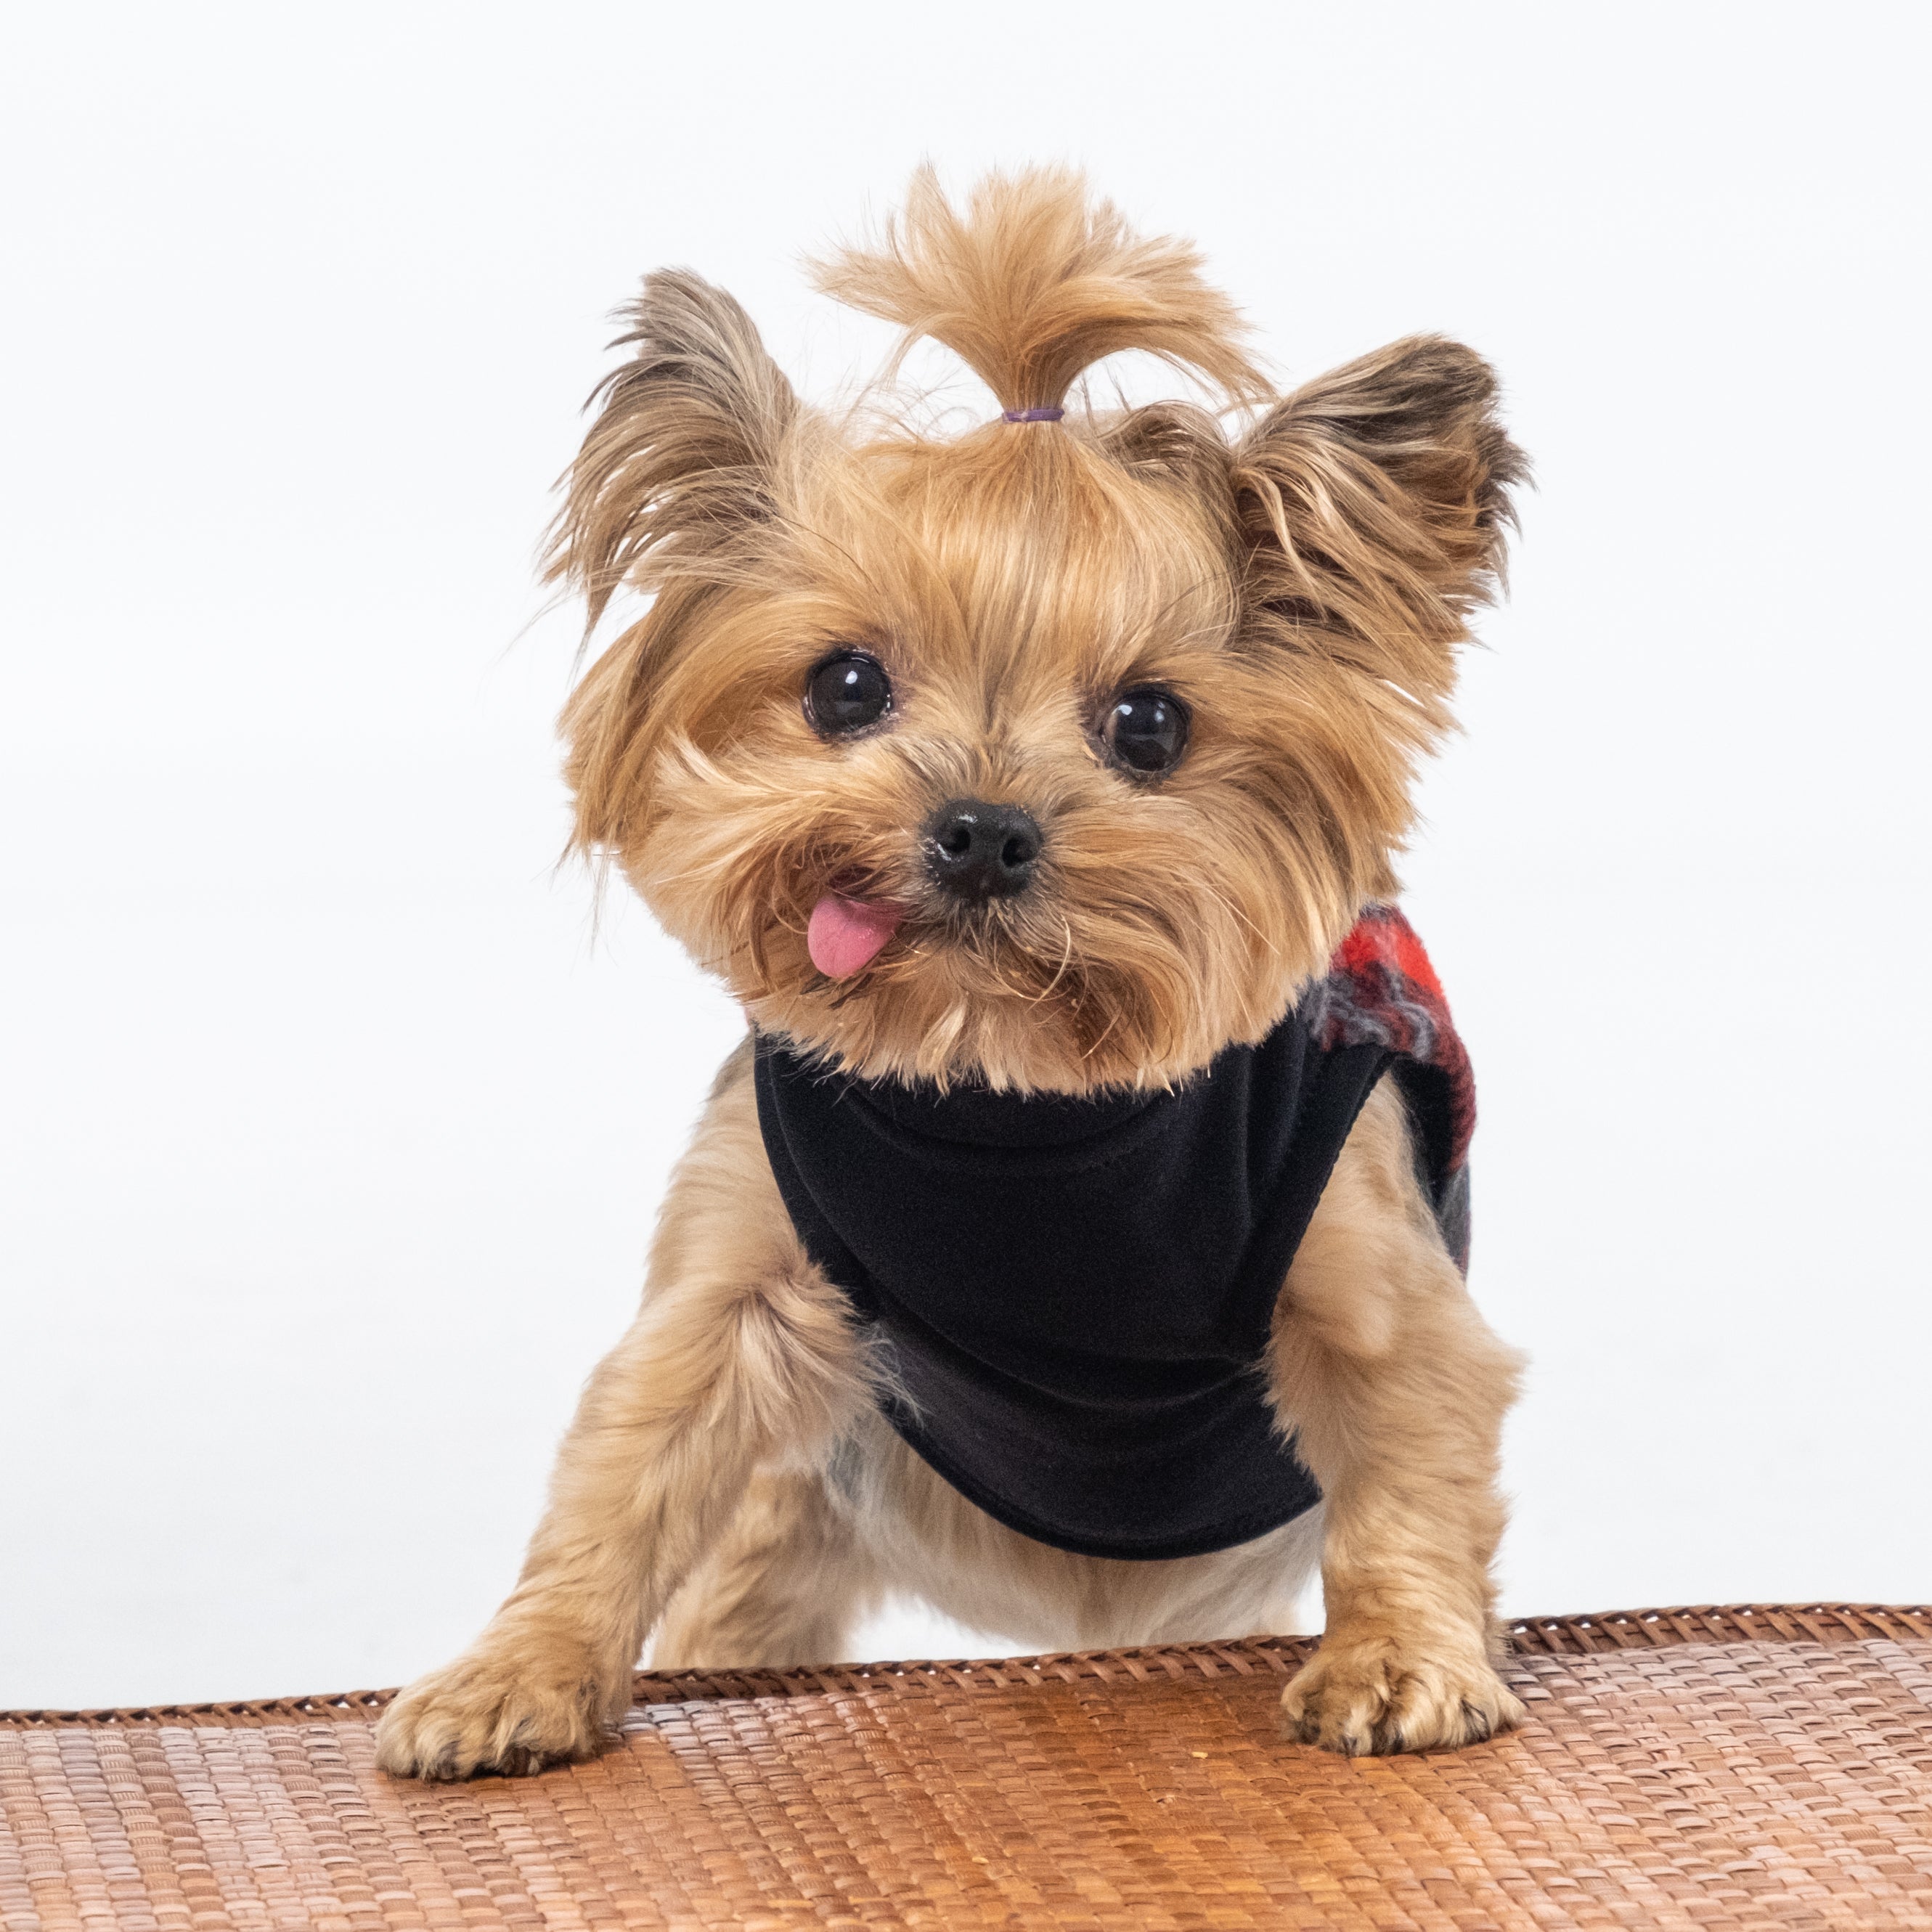 Red Paw Yorkshire Terrier Jacket